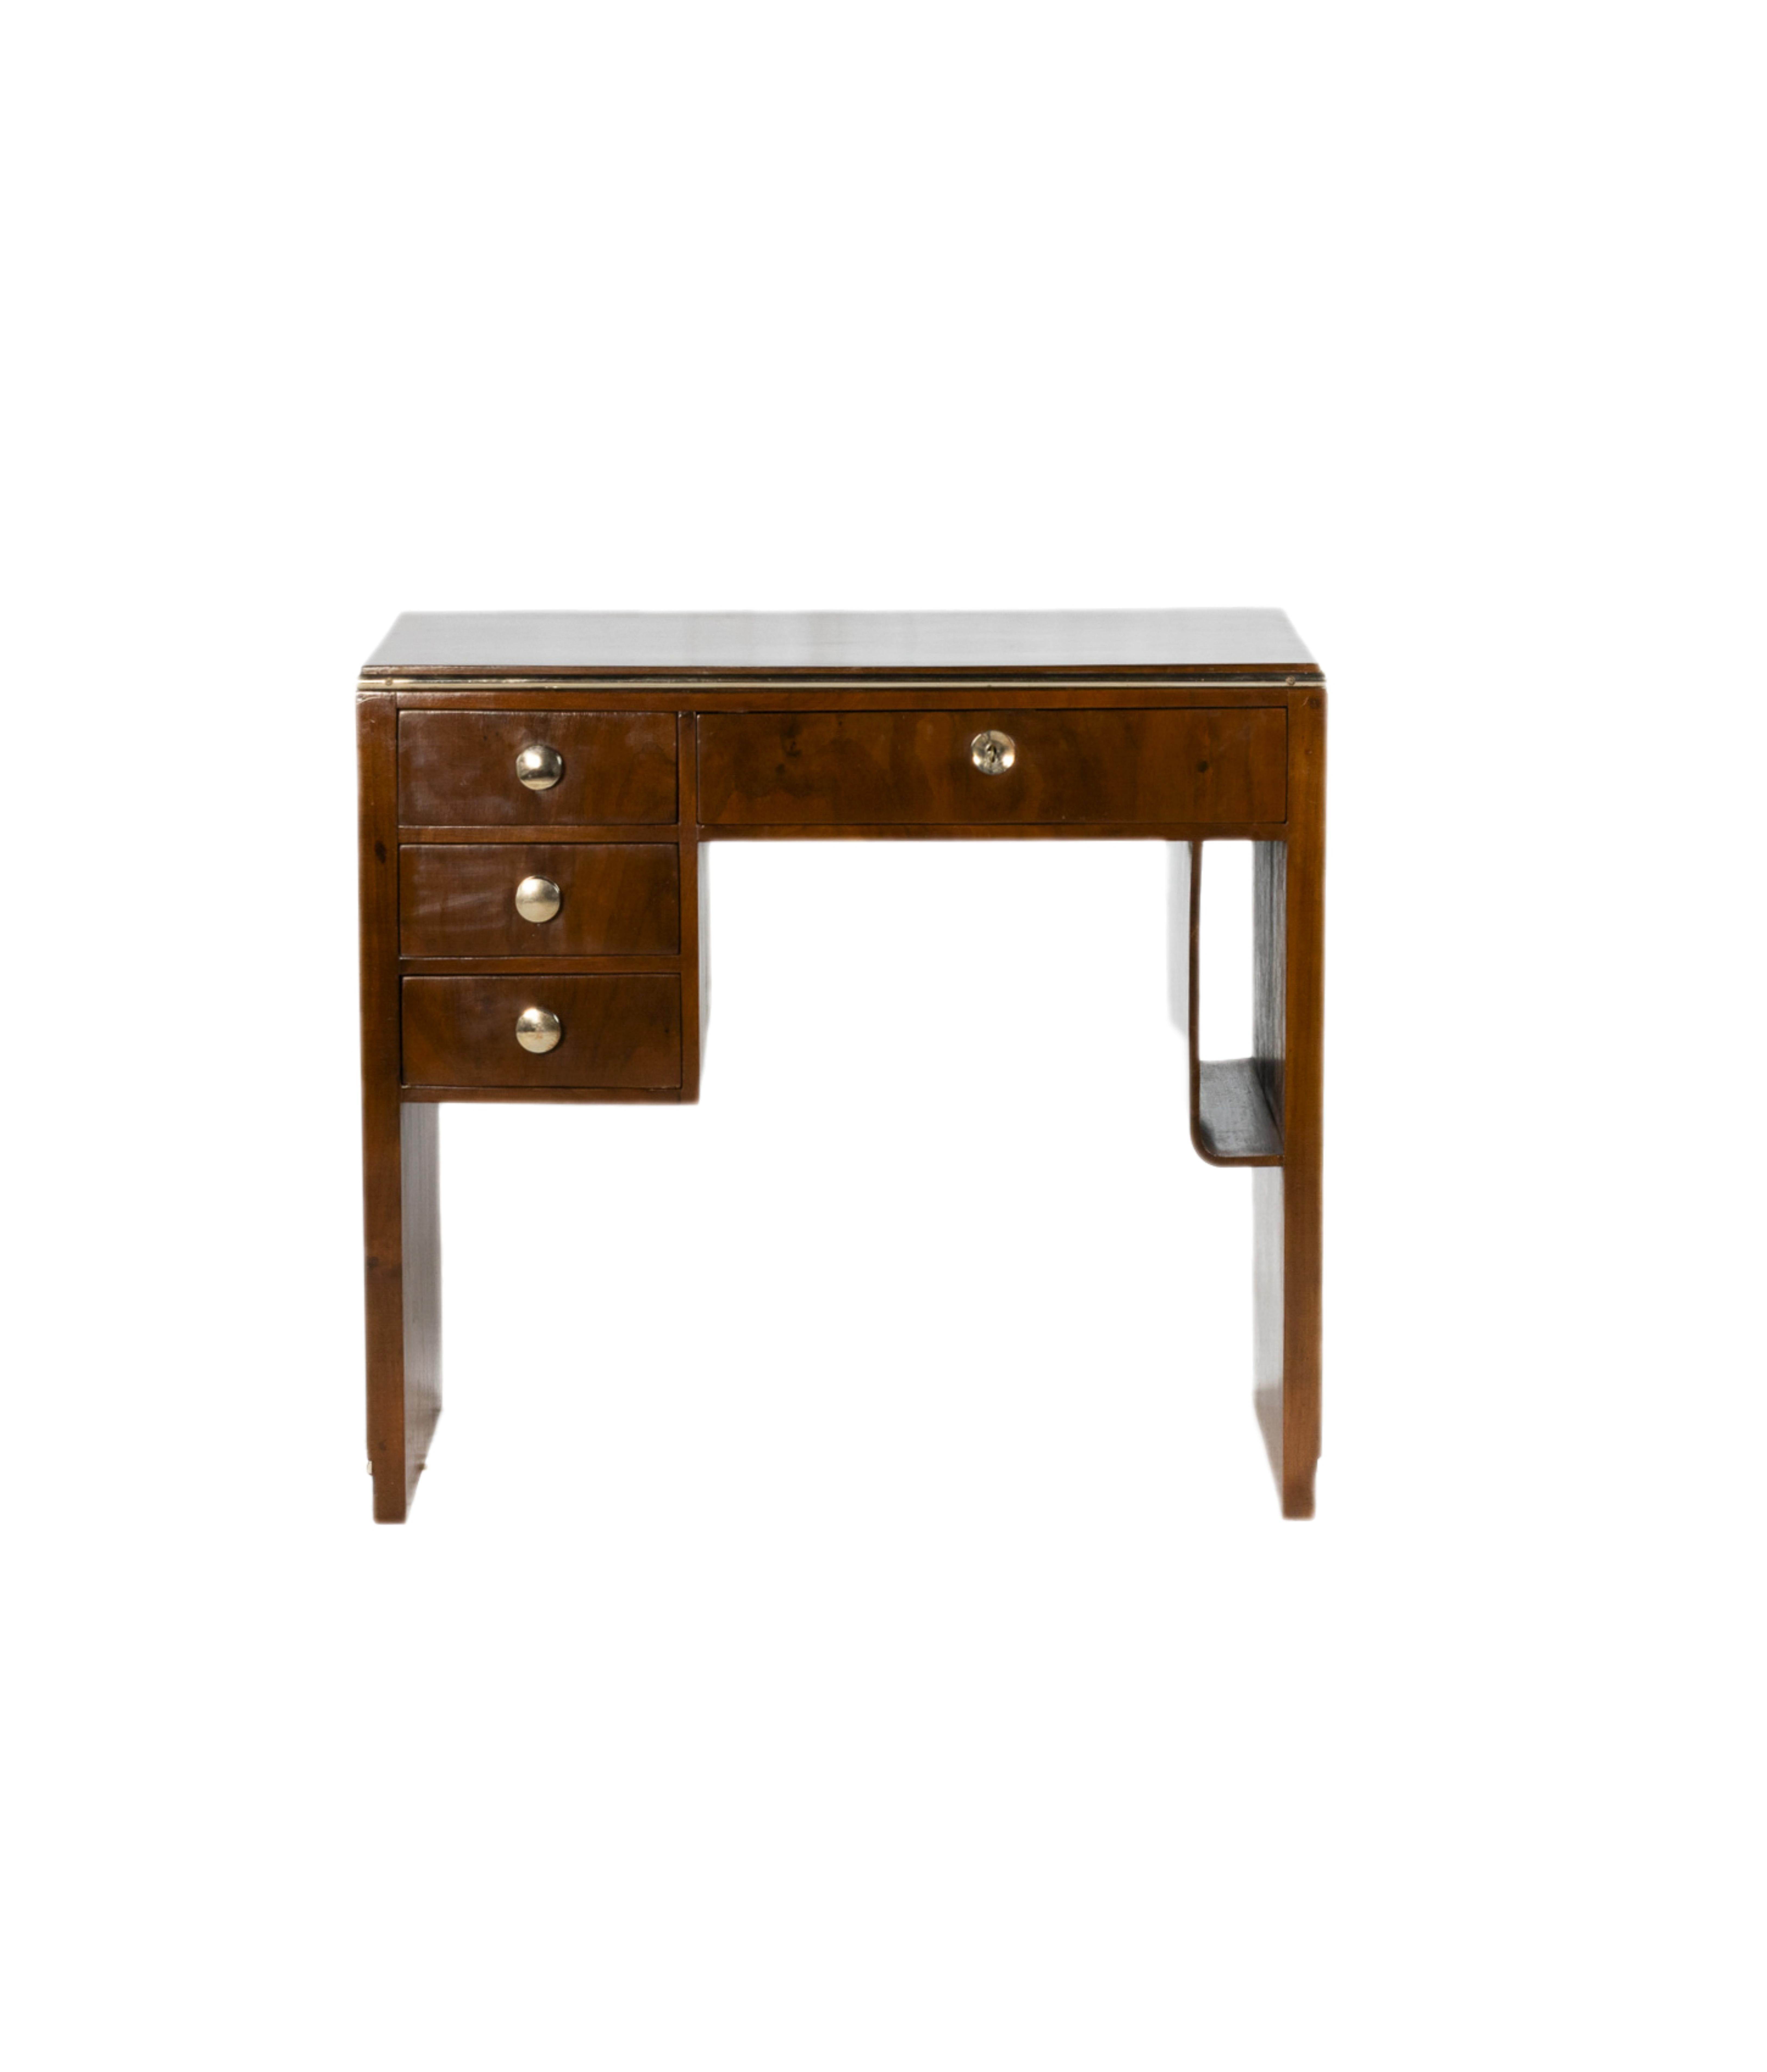 A  small desk in walnut and chromed details with newspaper holder on the right side, 3 drawers on the left side and a central one
Dimensions: 87x 49 cm 
78.5 cm height
Style: Art Deco (Of the Period)
Material: Walnut, wood, metal, chromed
Origin: